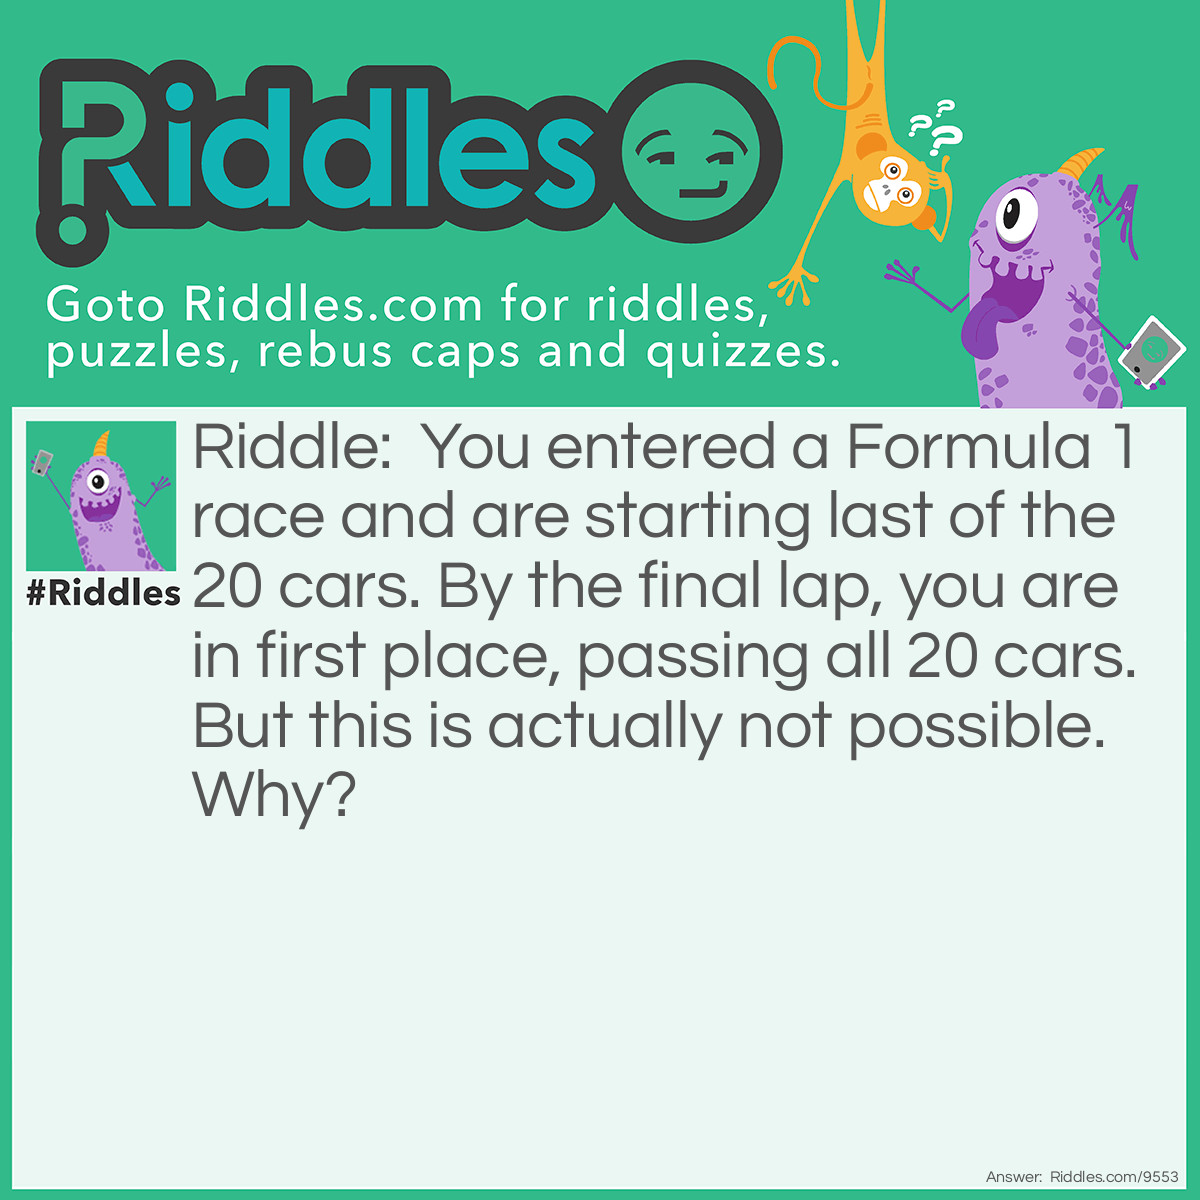 Riddle: You entered a Formula 1 race and are starting last of the 20 cars. By the final lap, you are in first place, passing all 20 cars. But this is actually not possible. Why? Answer: There are 20 cars including yourself. You can’t pass yourself.